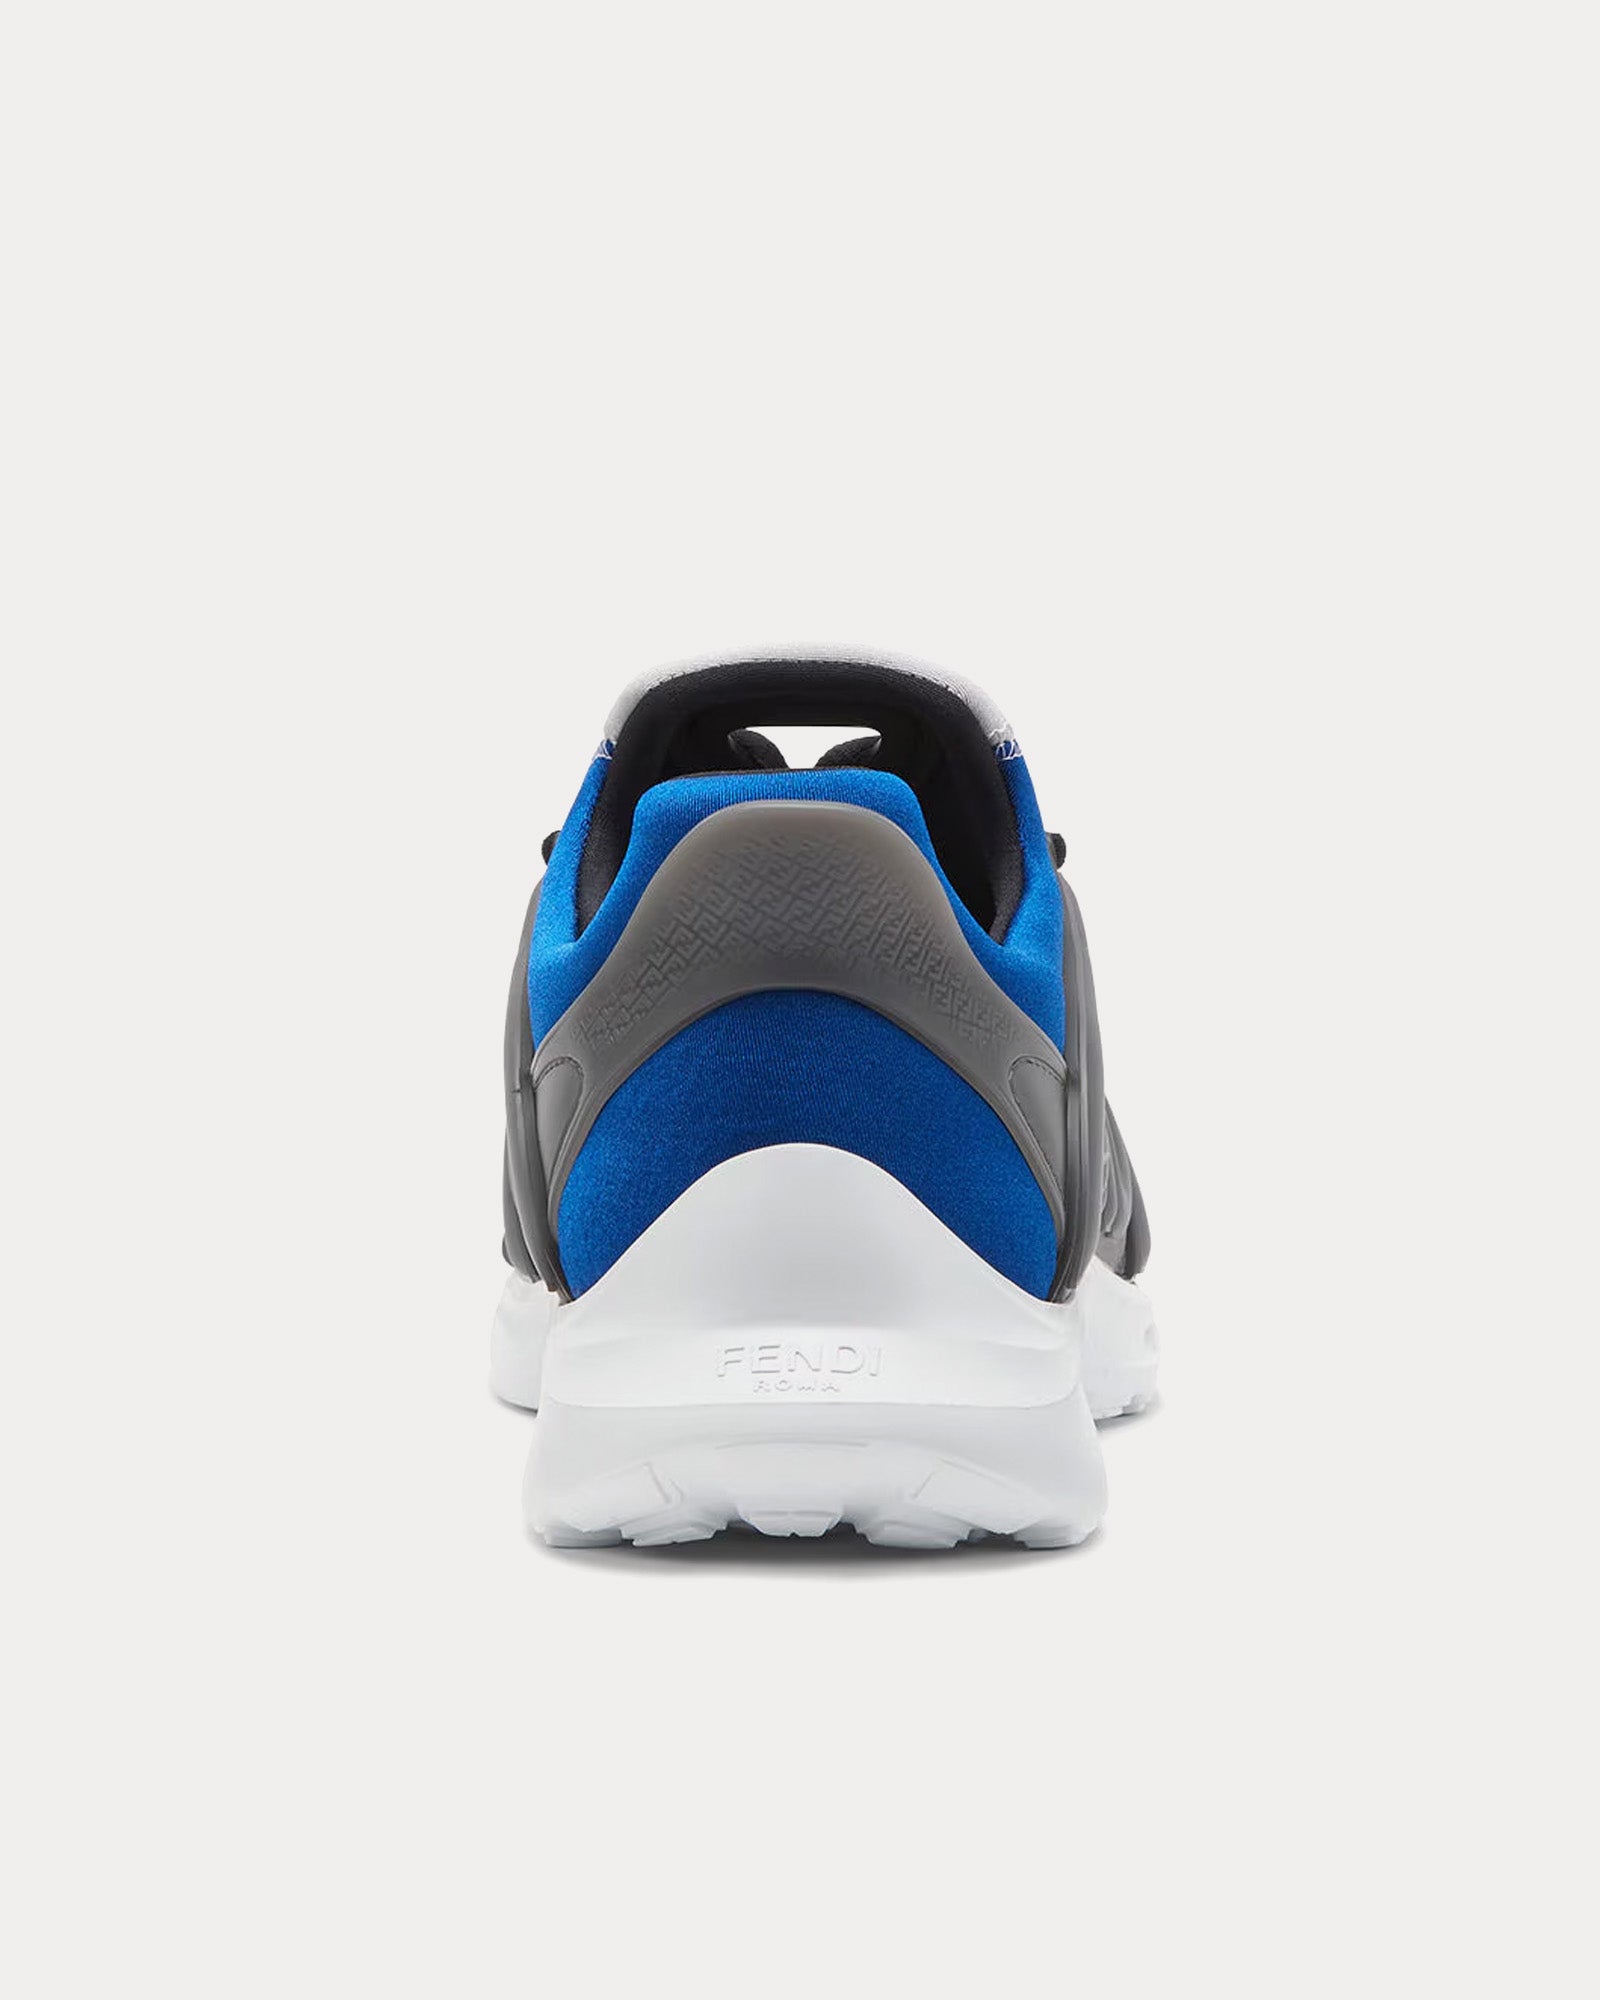 Fendi - Tag Technical Mesh Blue Low Top Sneakers